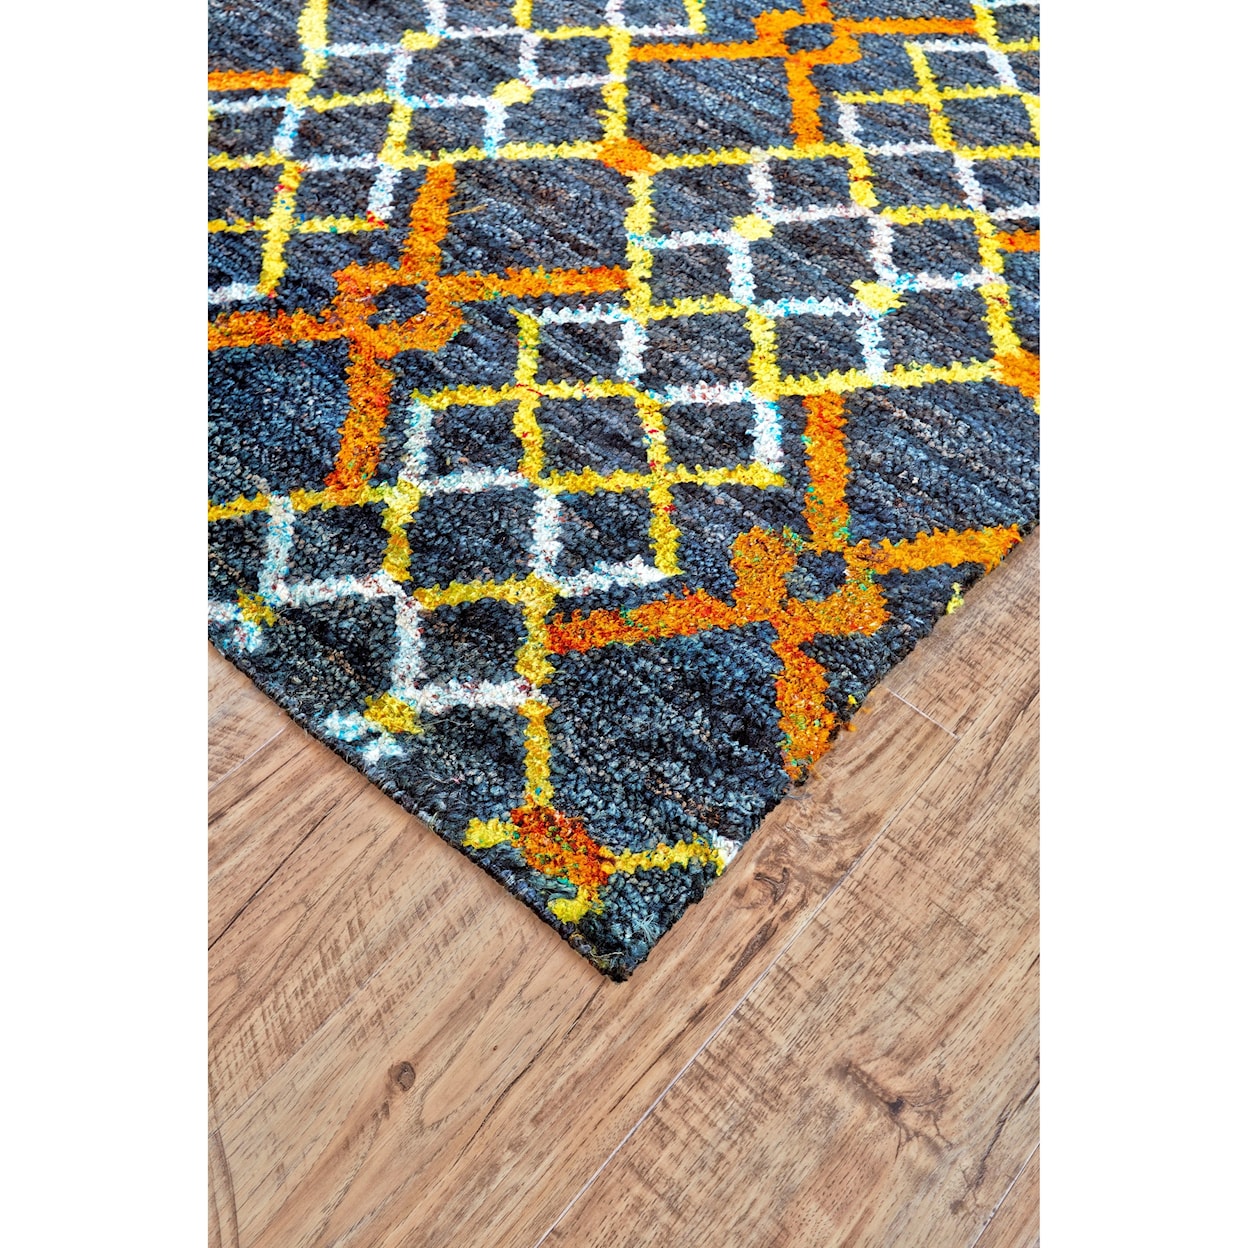 Feizy Rugs Tortola Amber 4' x 6' Area Rug